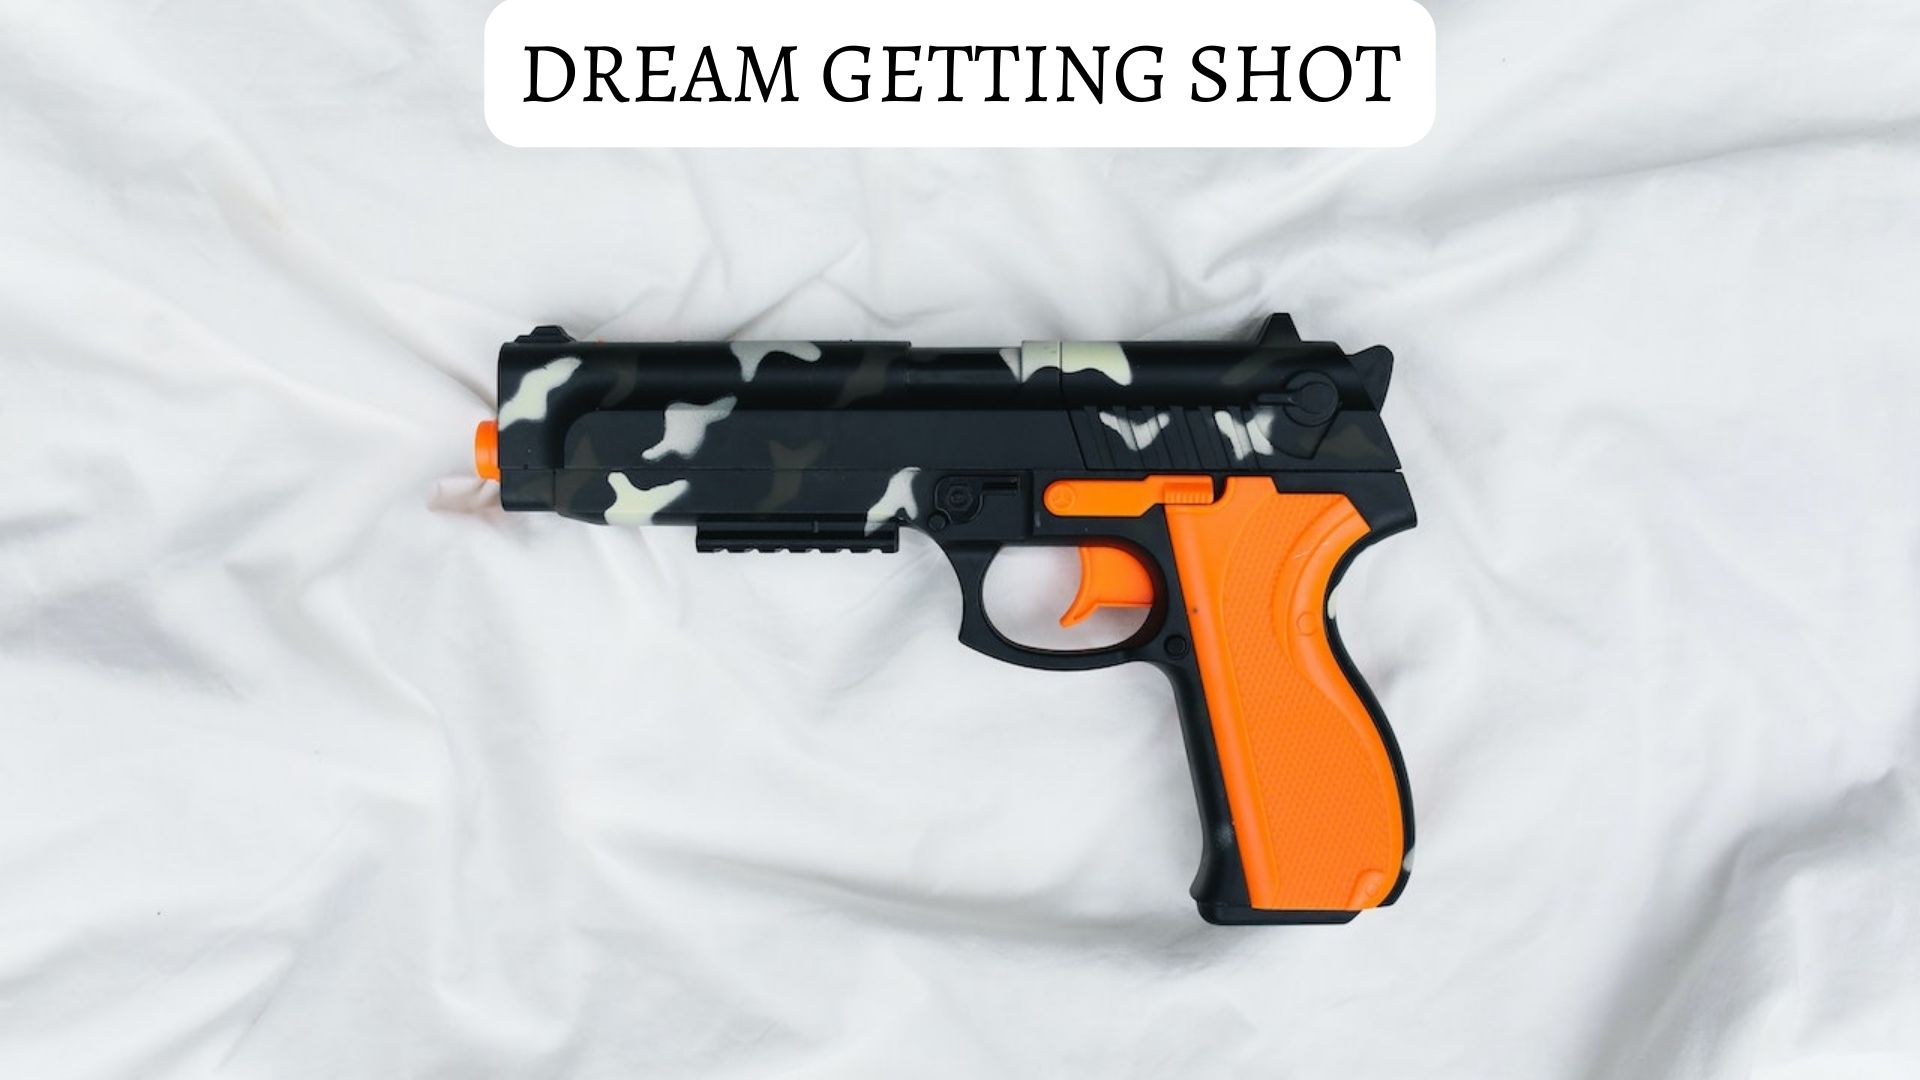 Dream Getting Shot - Sign Of Internal Concerns About Some Situation